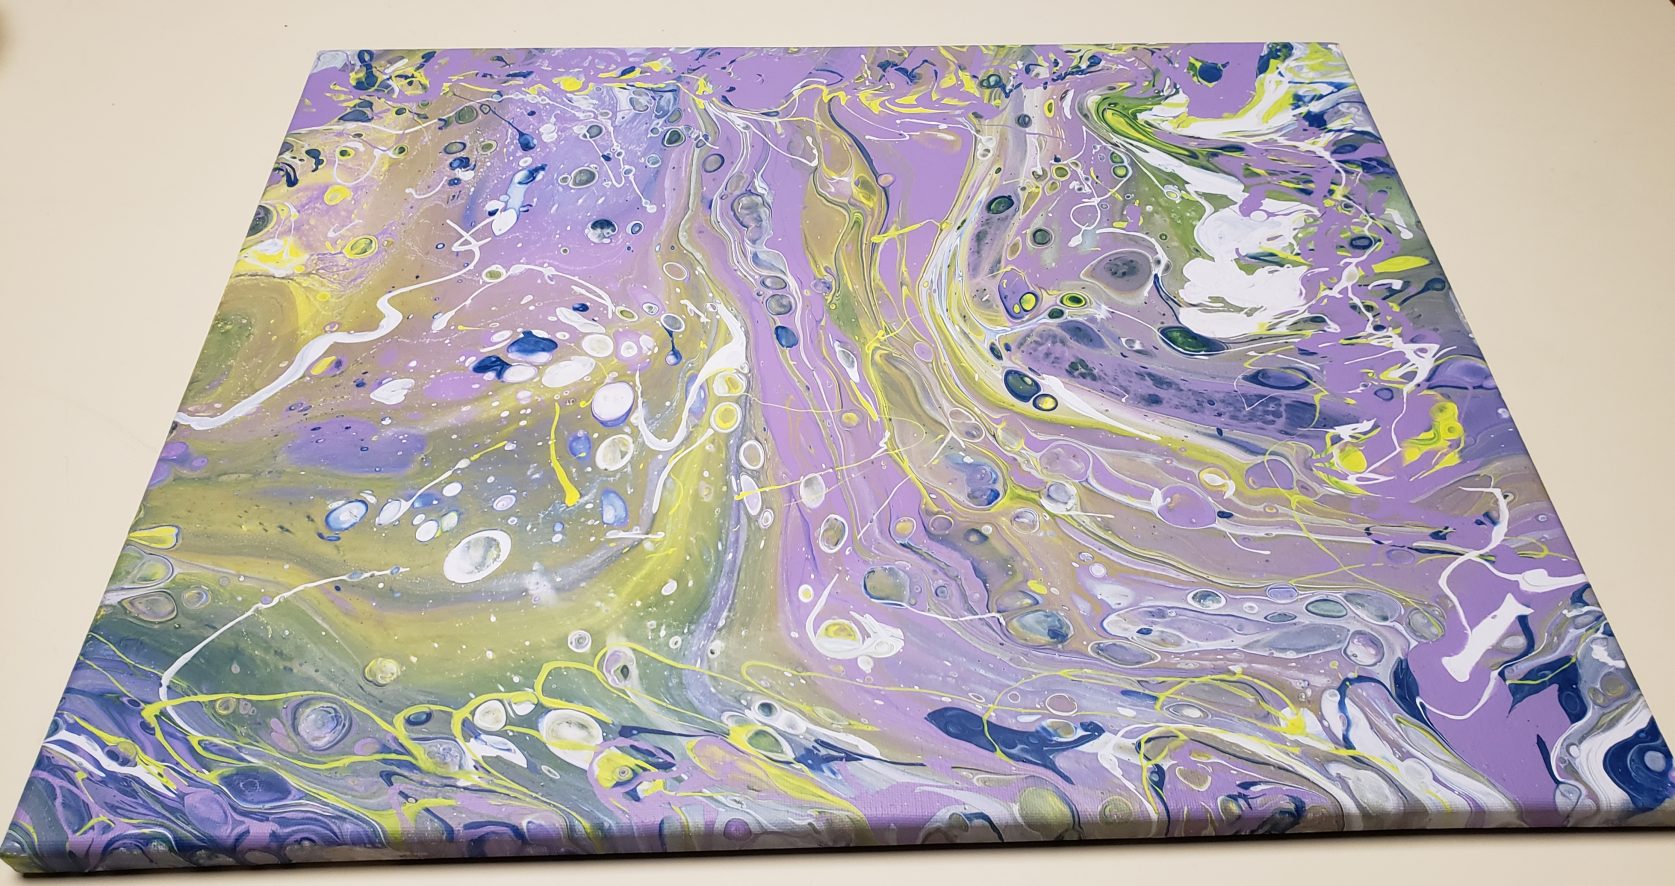 First Attempt at Acrylic Pour